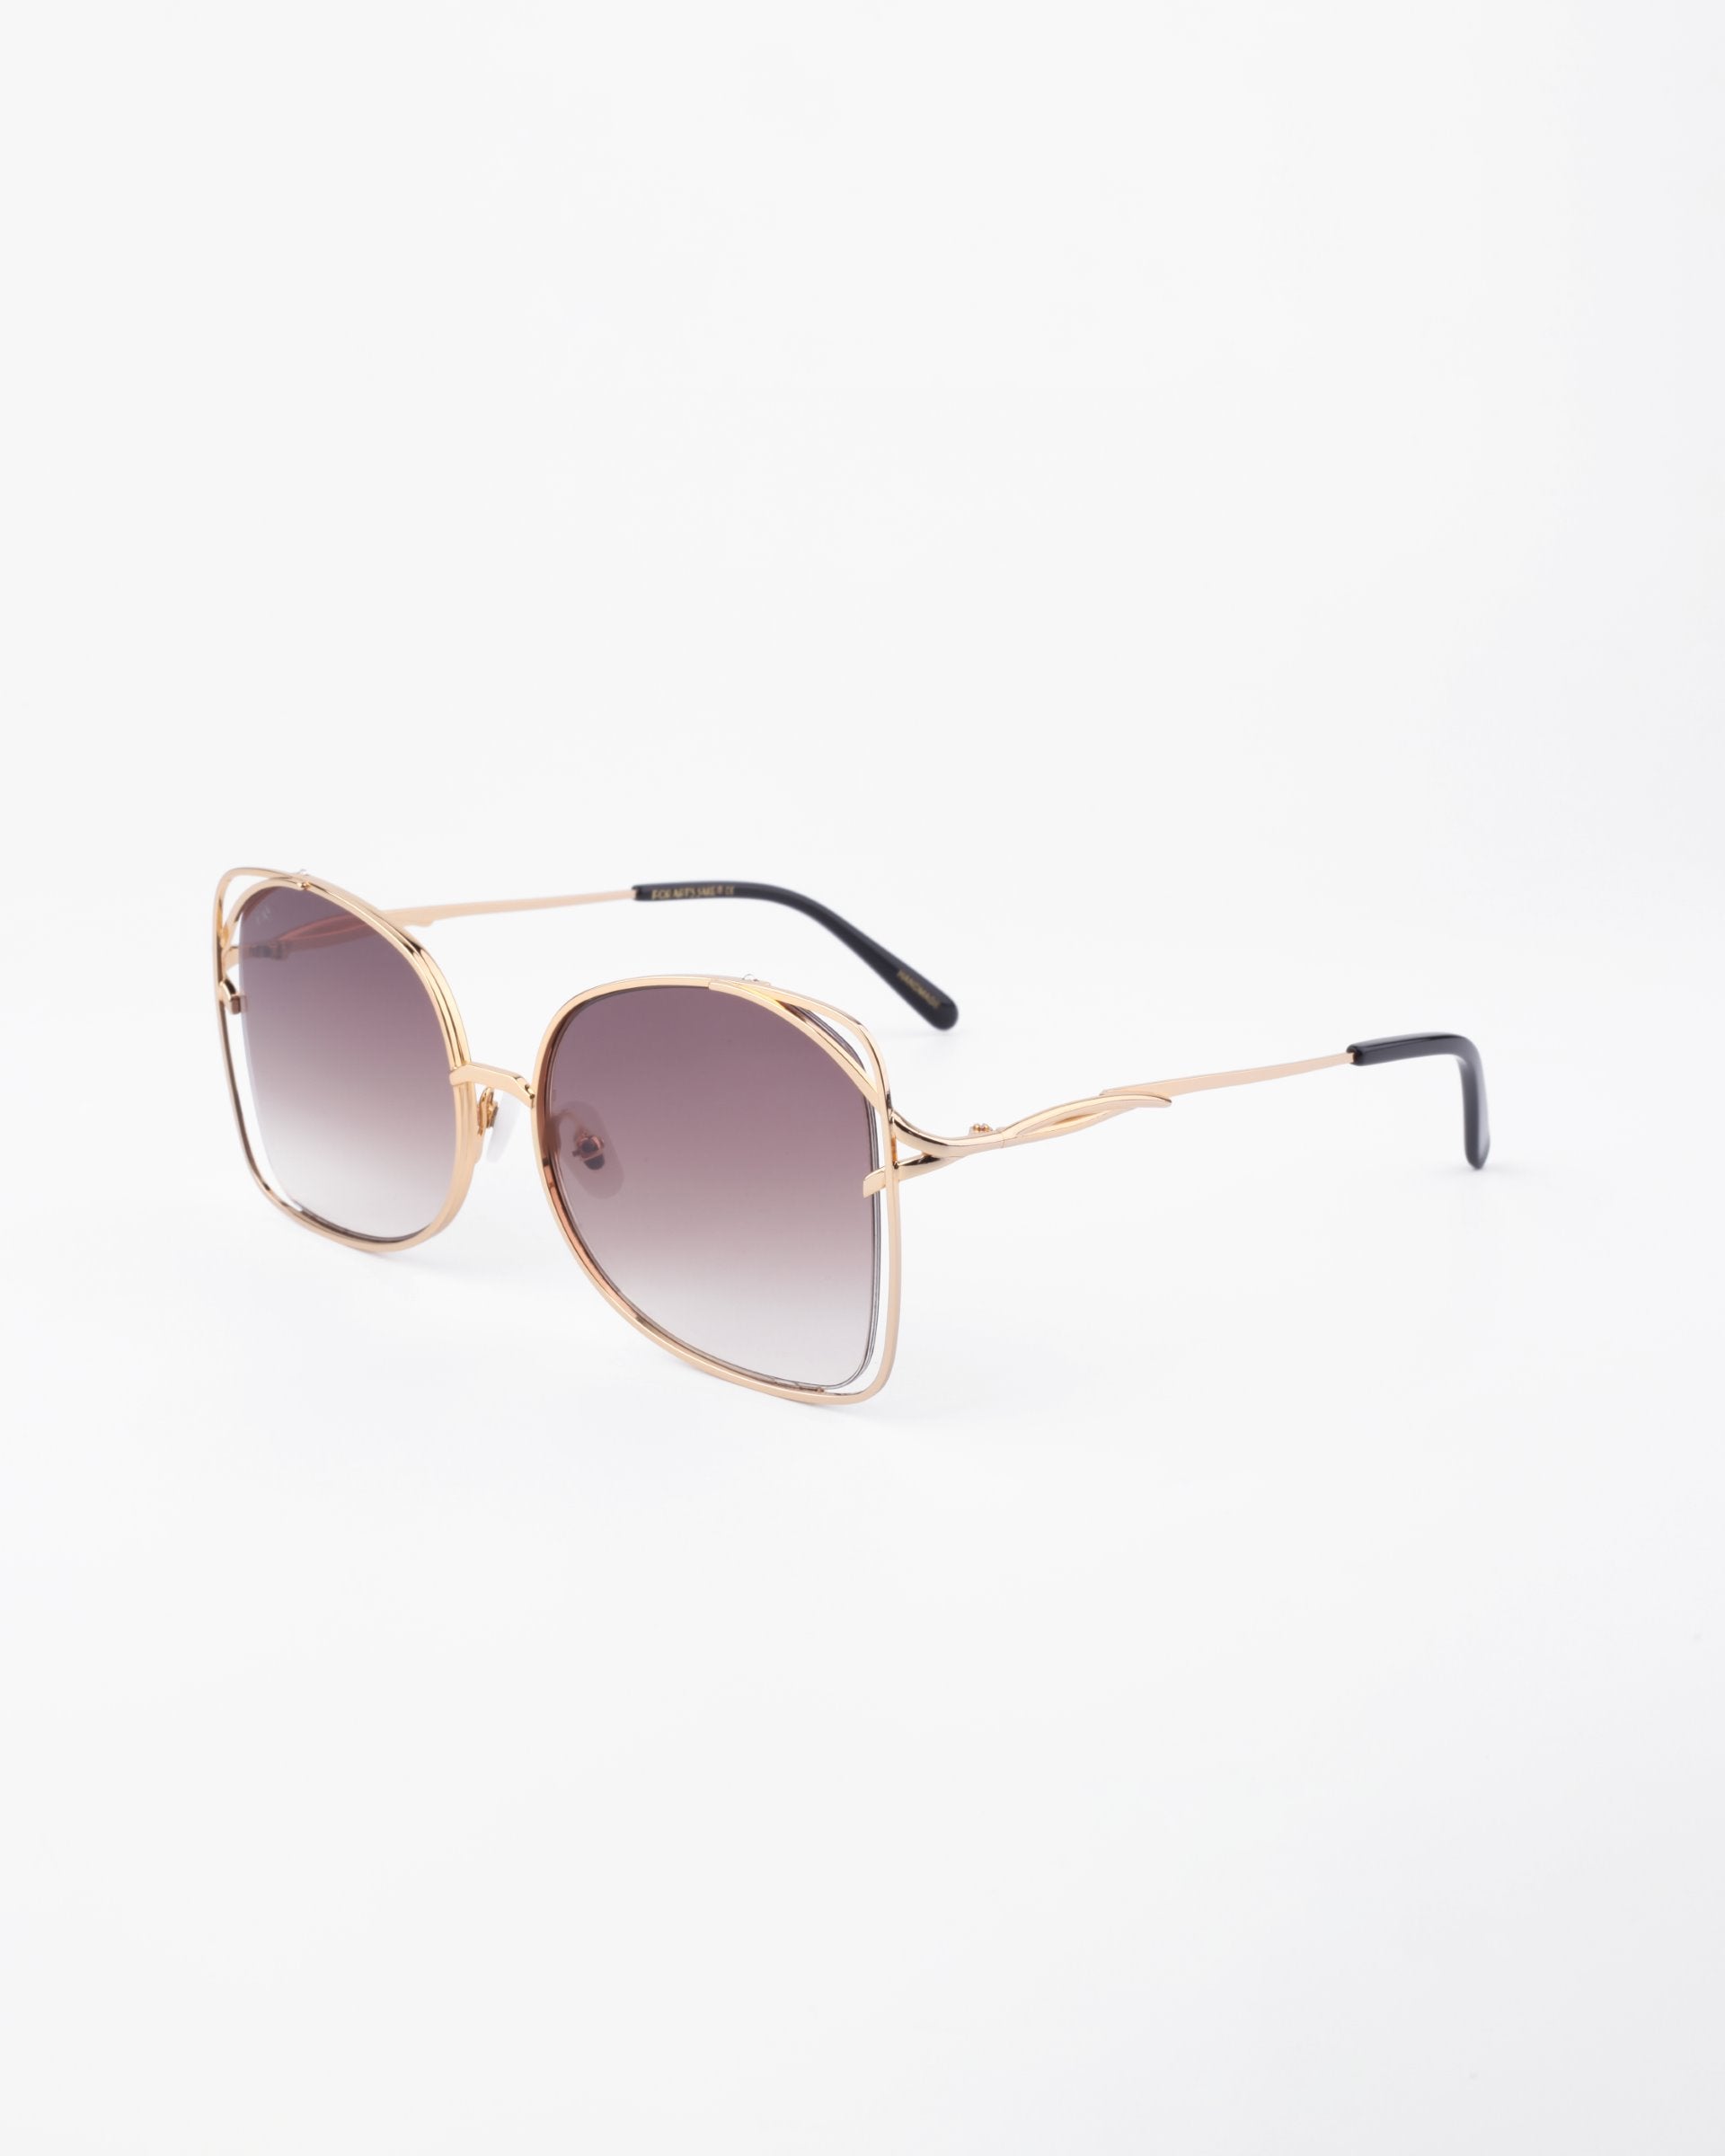 A pair of stylish, handmade sunglasses with large, square-shaped lenses shaded from dark to light. The Carousel sunglasses by For Art&#39;s Sake® feature a thin, gold-plated stainless steel frame with black temple tips. They offer complete UVA &amp; UVB protection. The background is plain white.